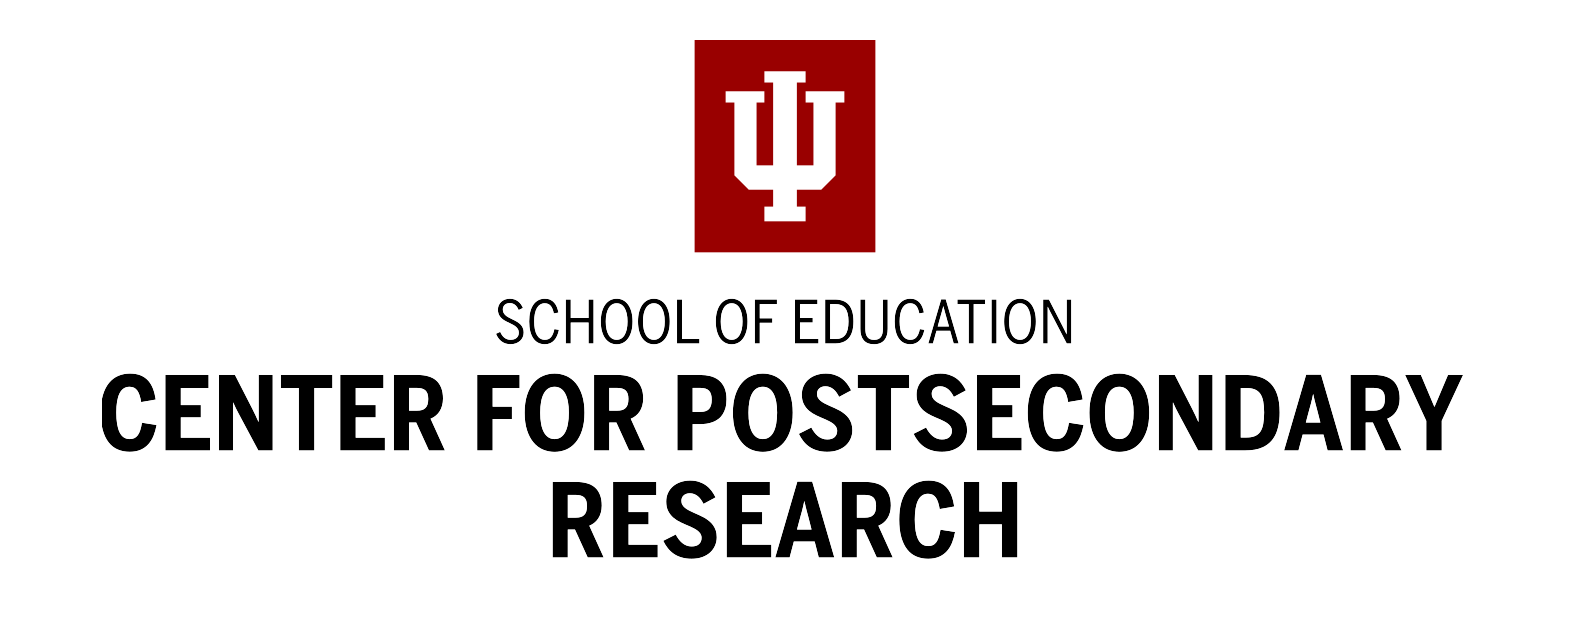 IU School of Education - Center for Postsecondary Research logo with IU Trident